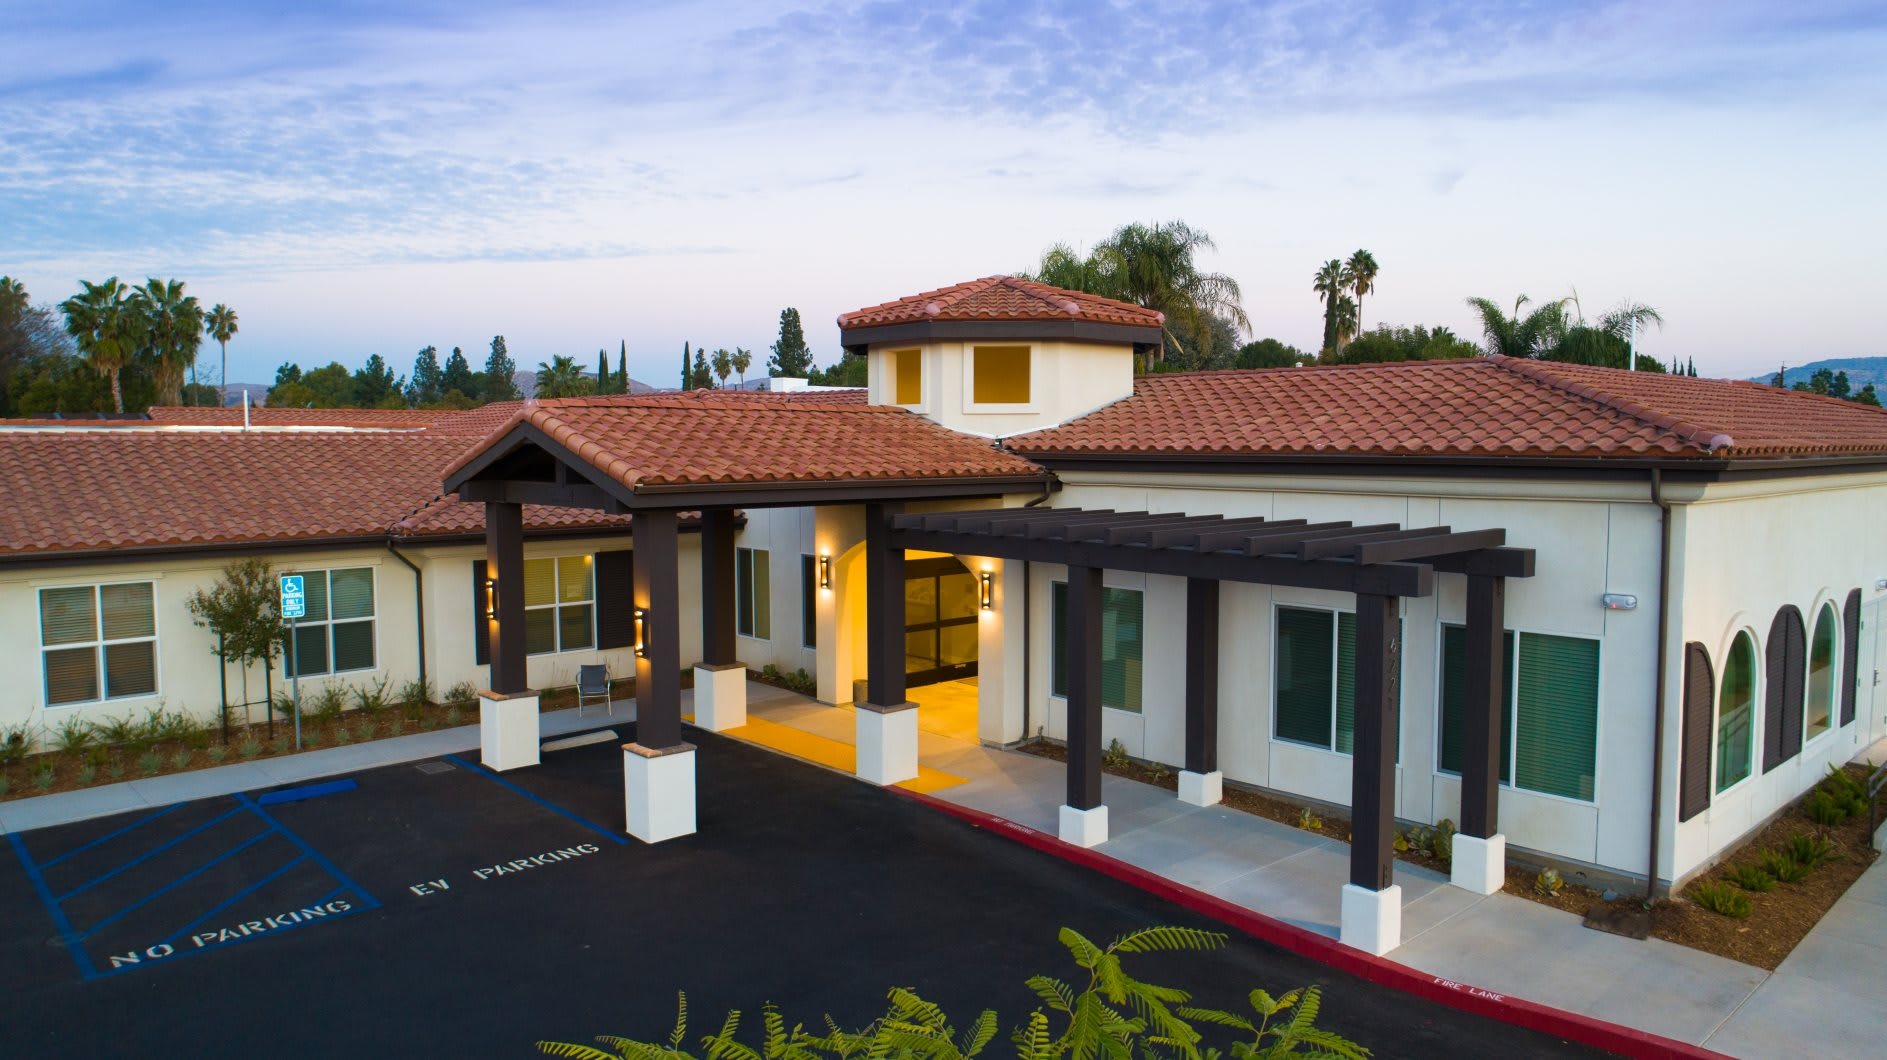 The Preserve at Woodland Hills Assisted Living & Memory Care community exterior